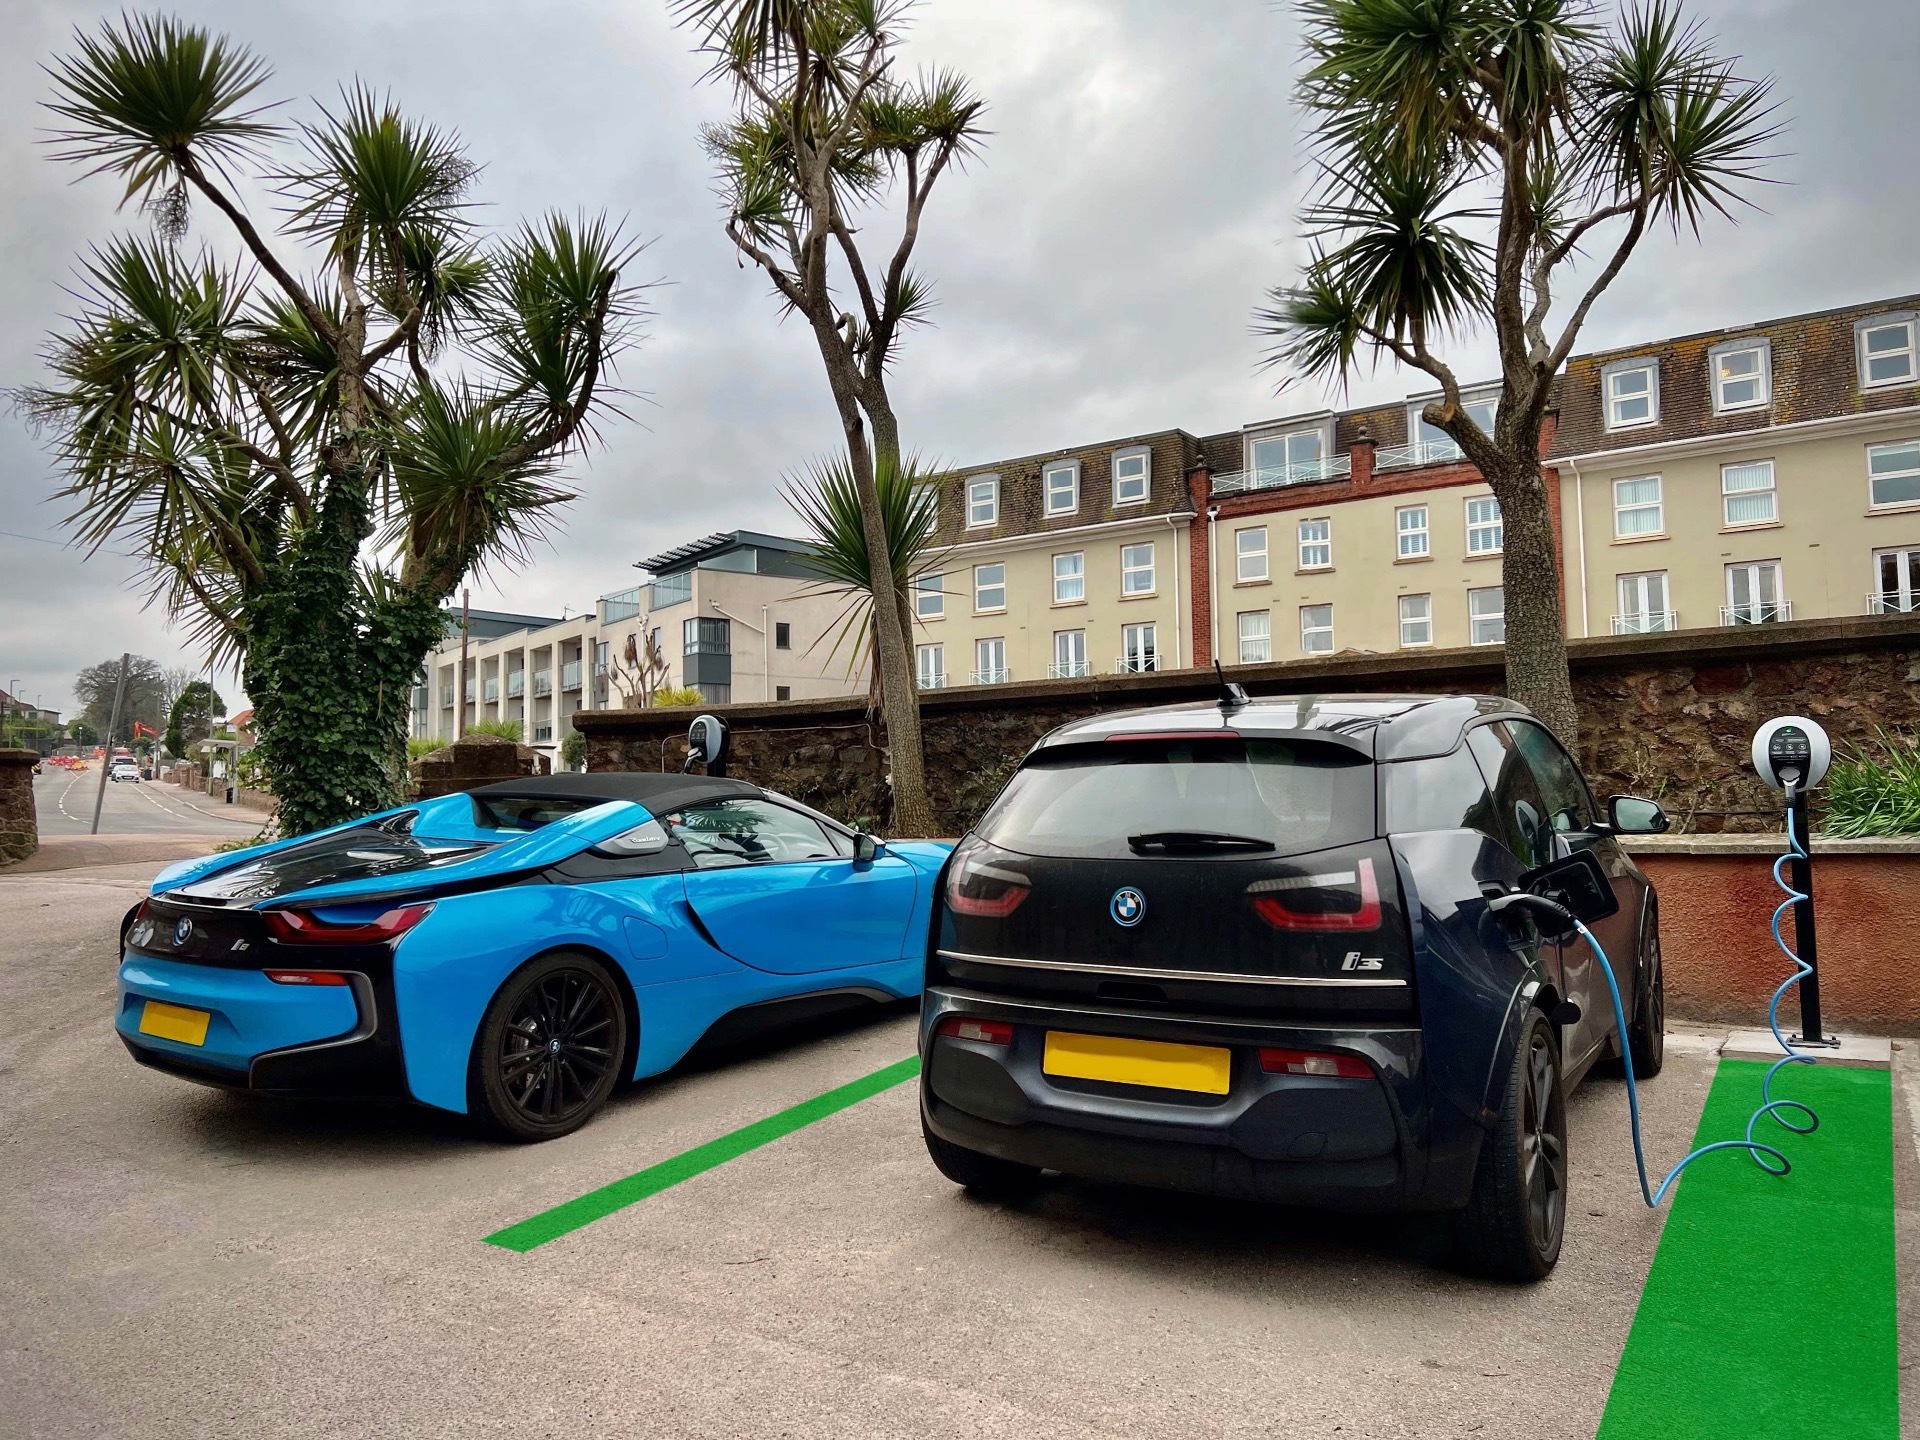 Electric car charging at the Livermead Cliff Hotel in Torquay